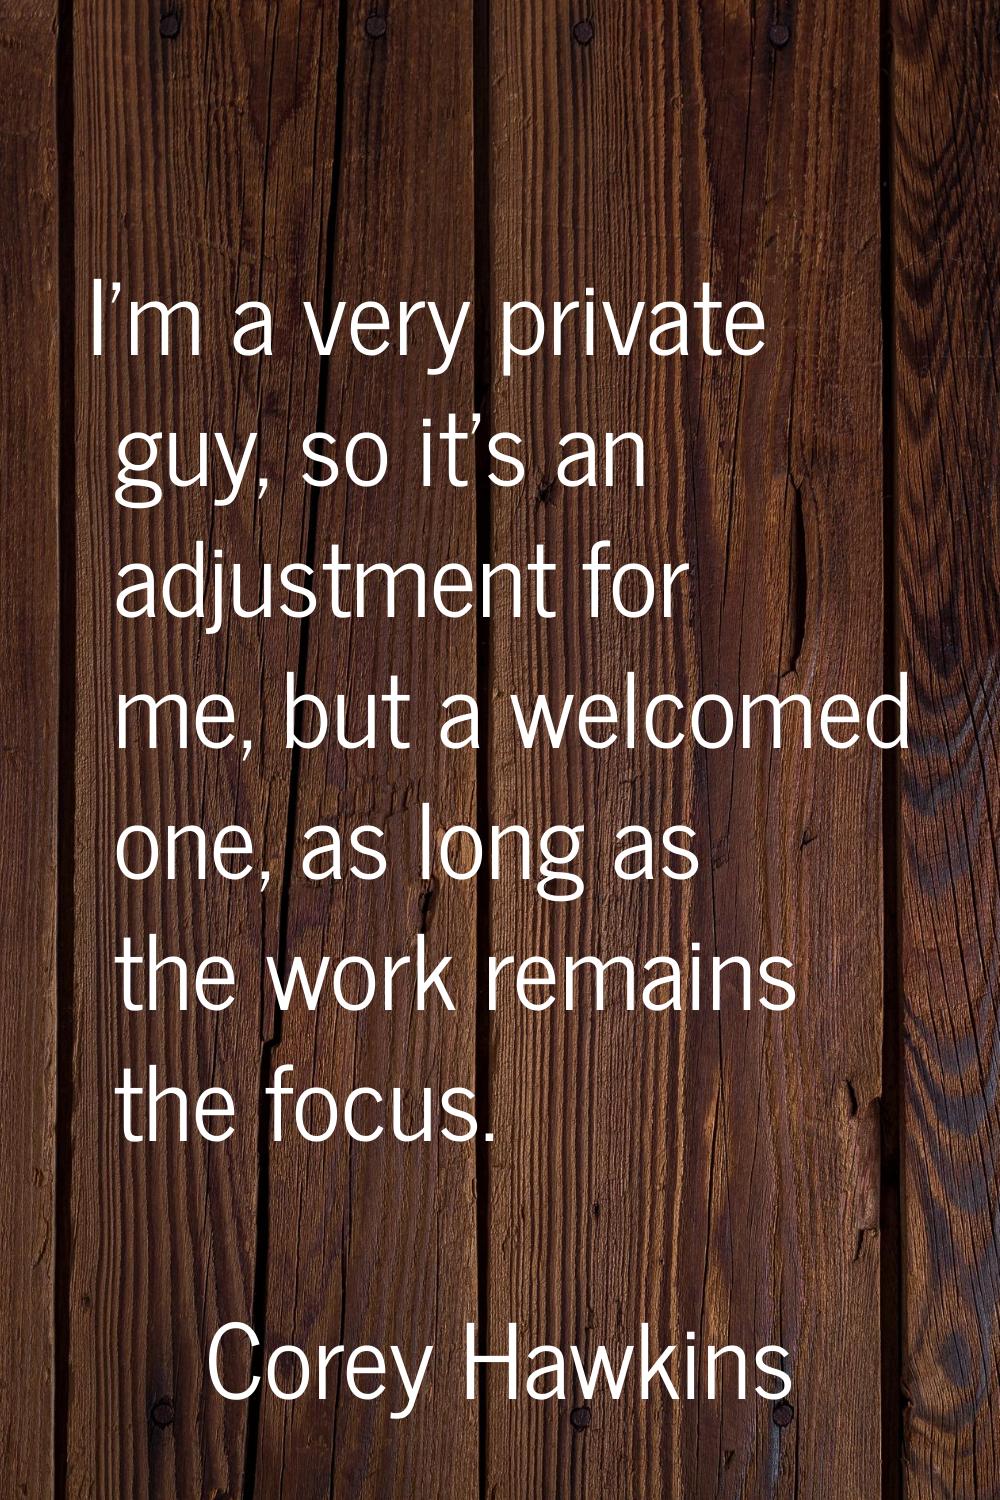 I'm a very private guy, so it's an adjustment for me, but a welcomed one, as long as the work remai